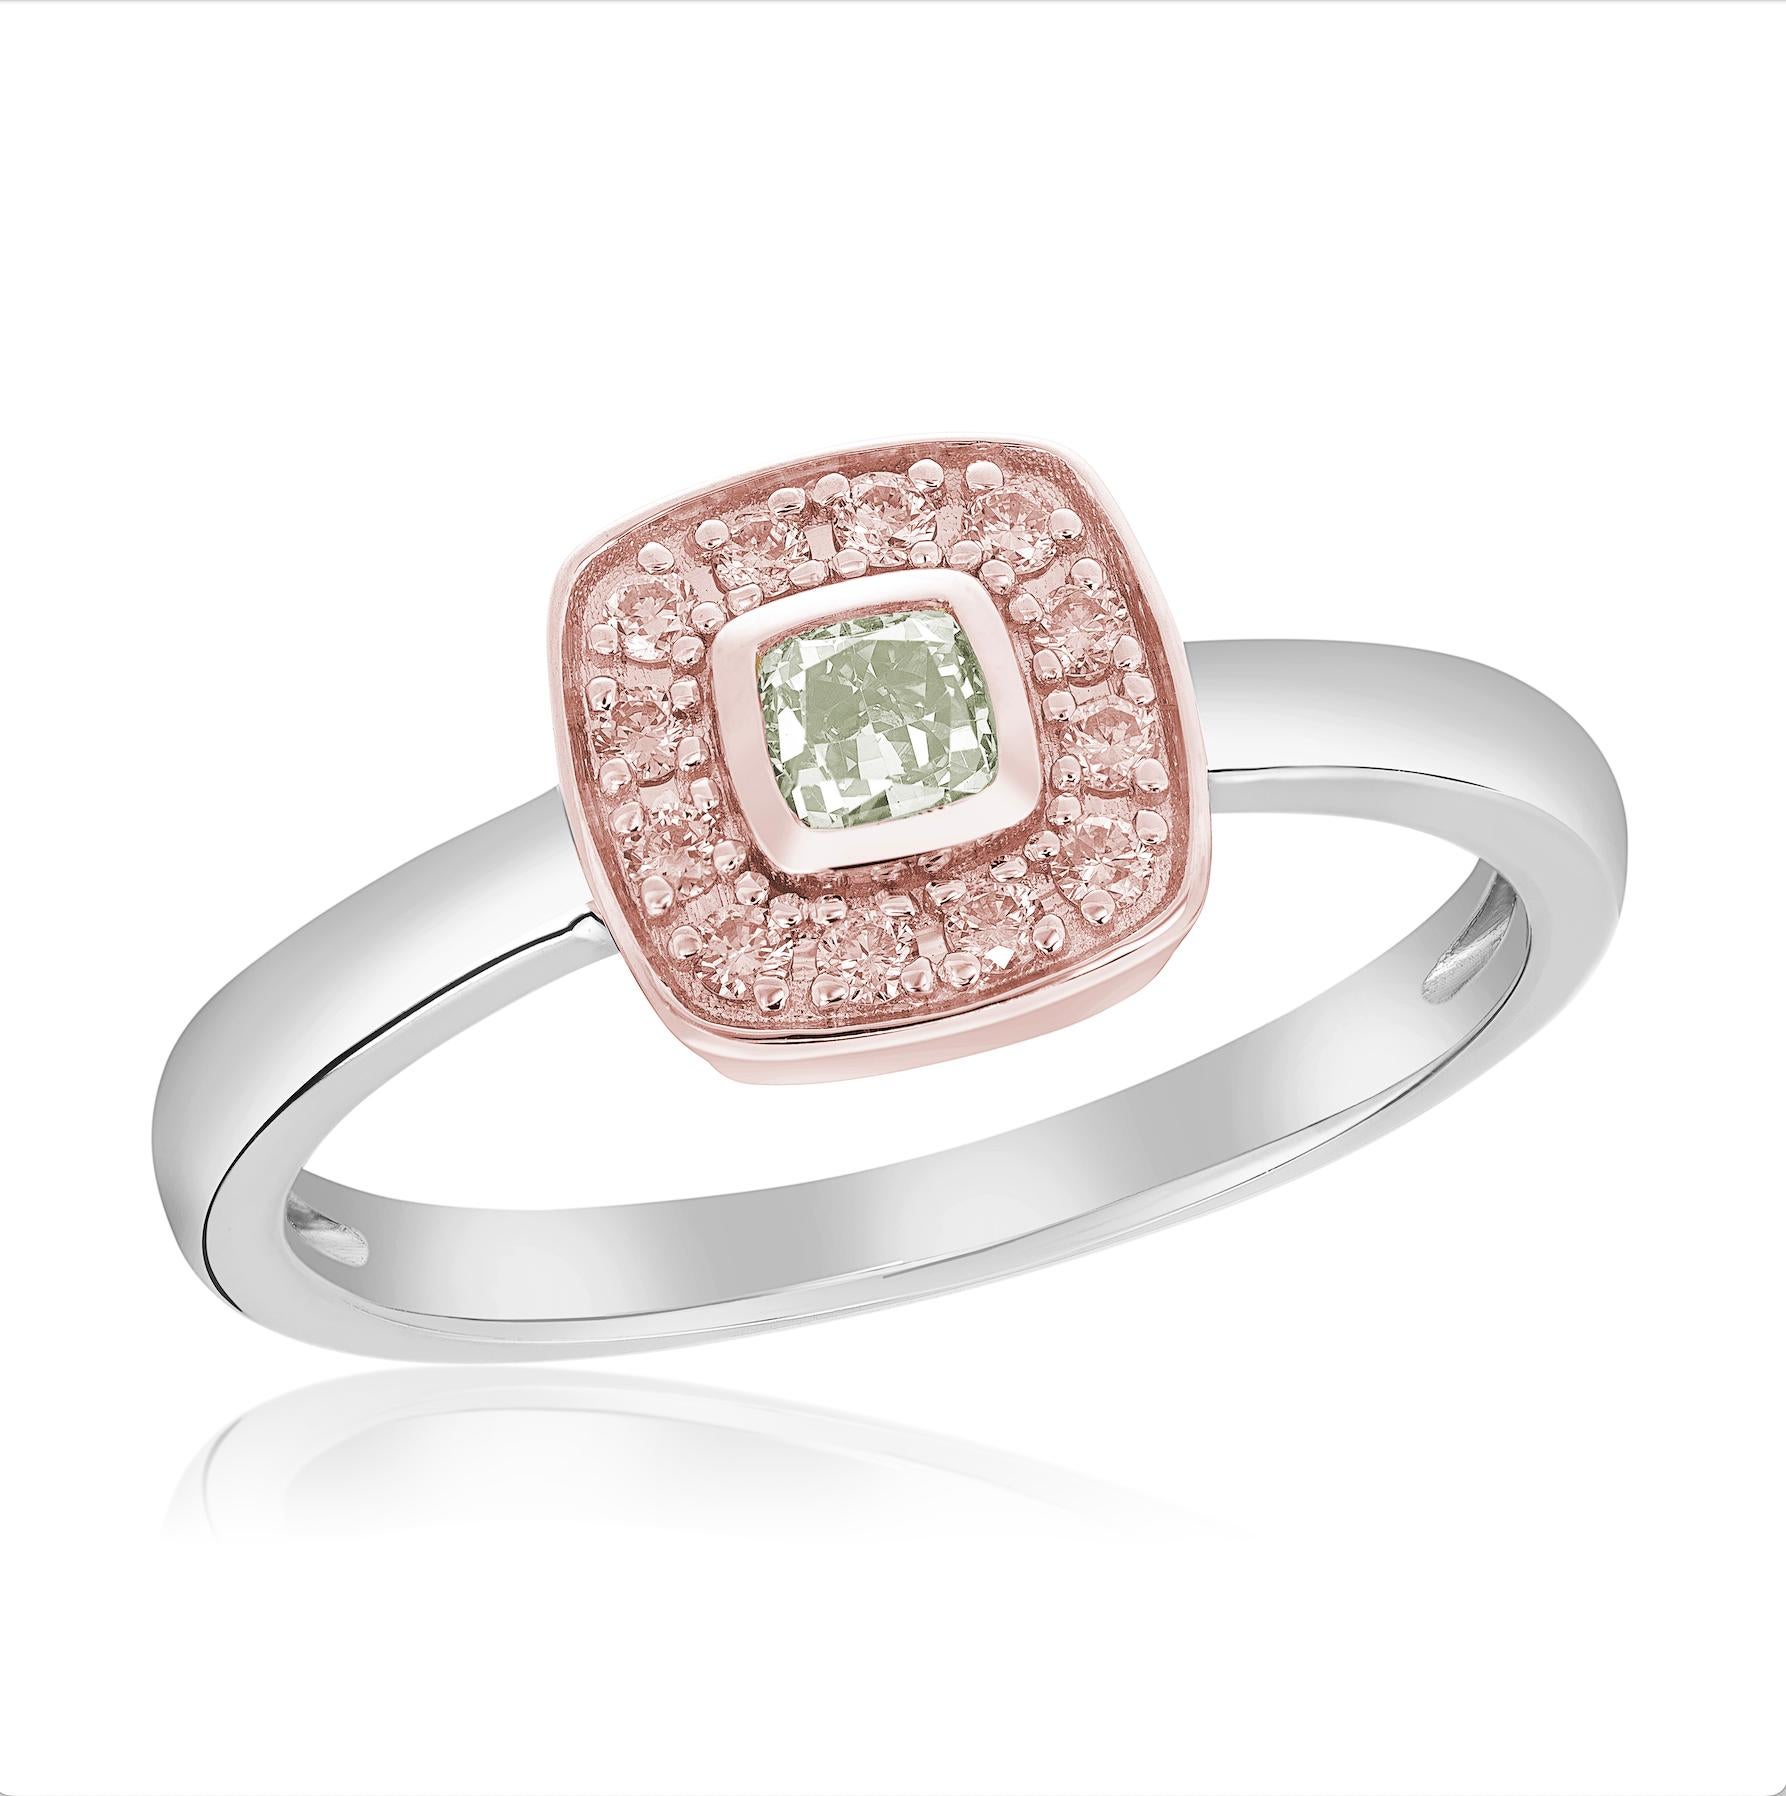 Indulge in the exquisite beauty of our stackable halo ring, adorned with a captivating 0.16-carat fancy intense yellowish-green cushion diamond. Embraced by a halo of 14k rose gold, this enchanting gem is enhanced by 12 dazzling fancy argyle pink